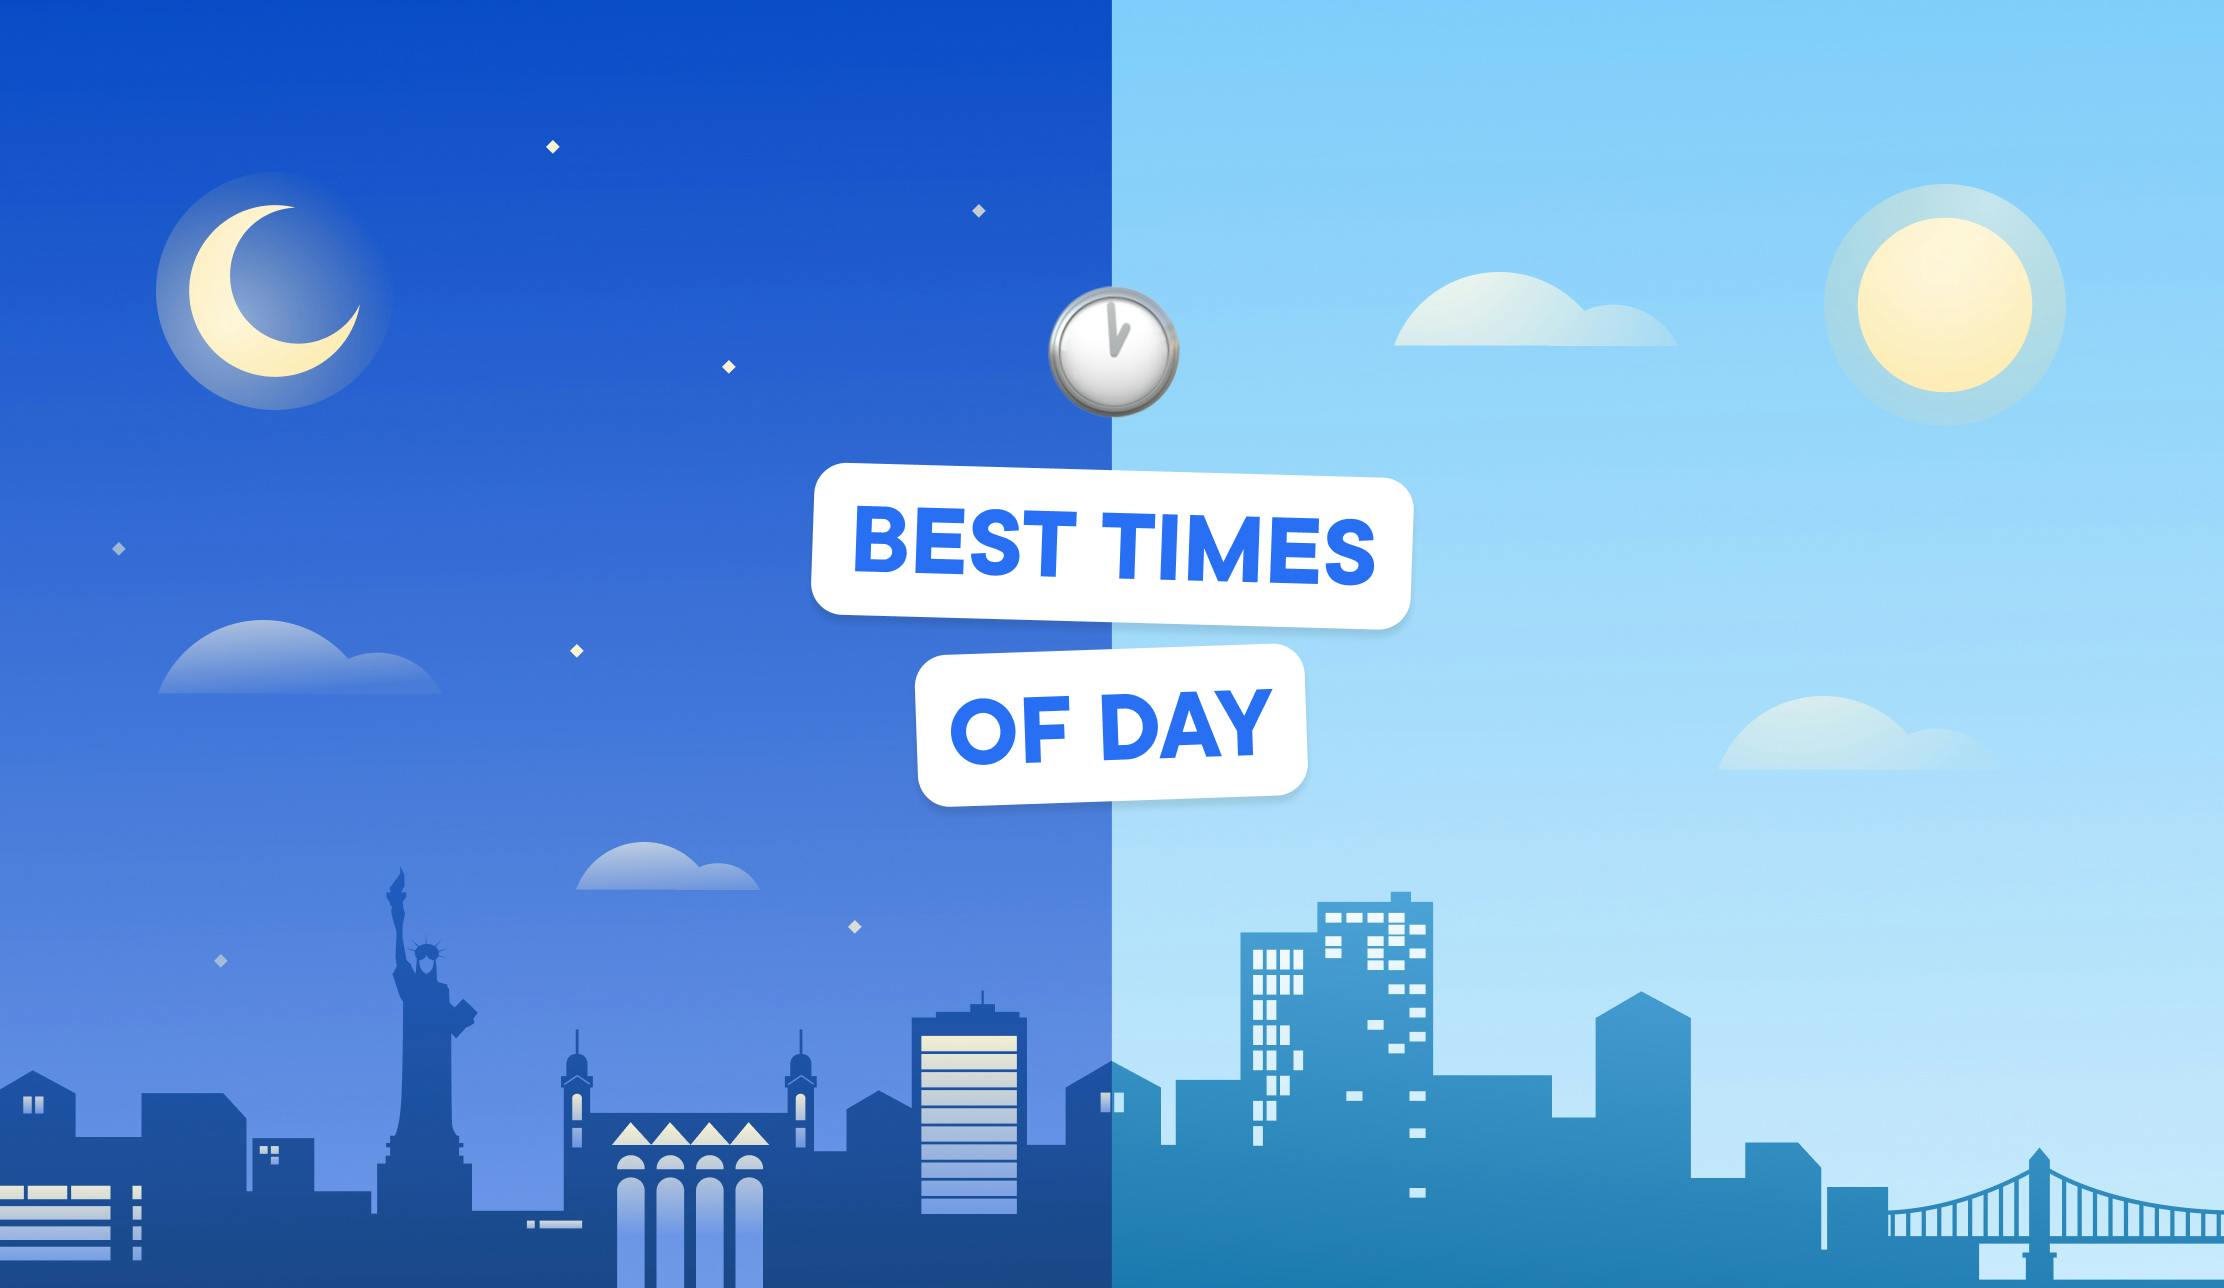 best times of day for drivers in nyc